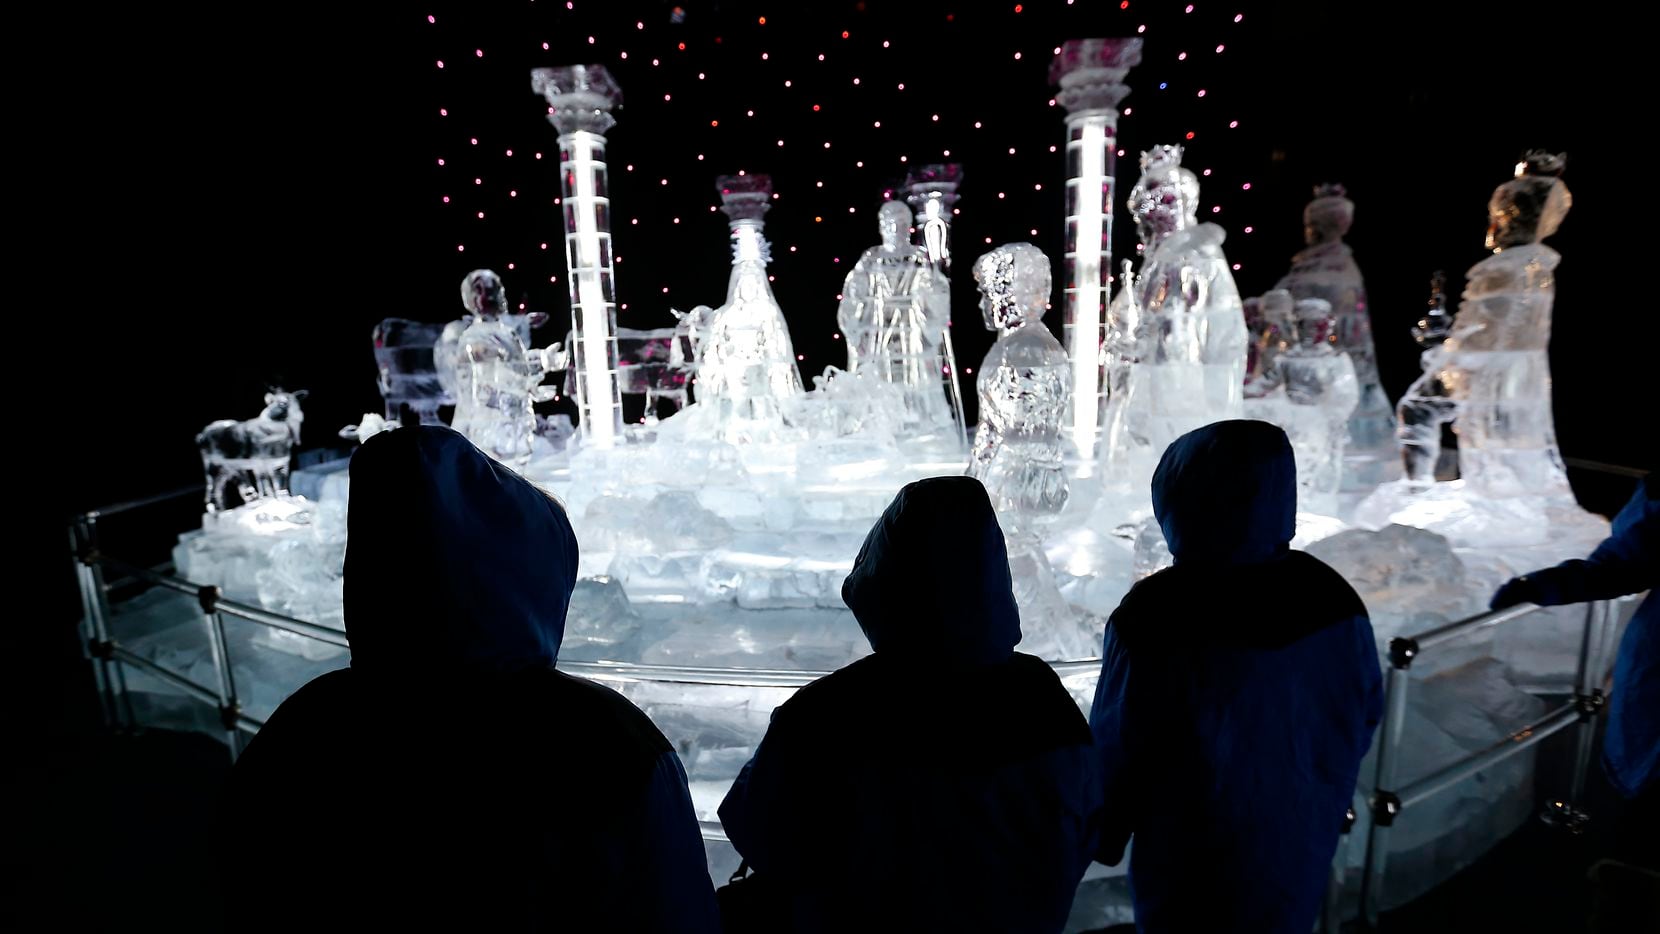 ICE! in Grapevine is on ice this year. Instead, during The Gaylord Texan Resort’s holiday...